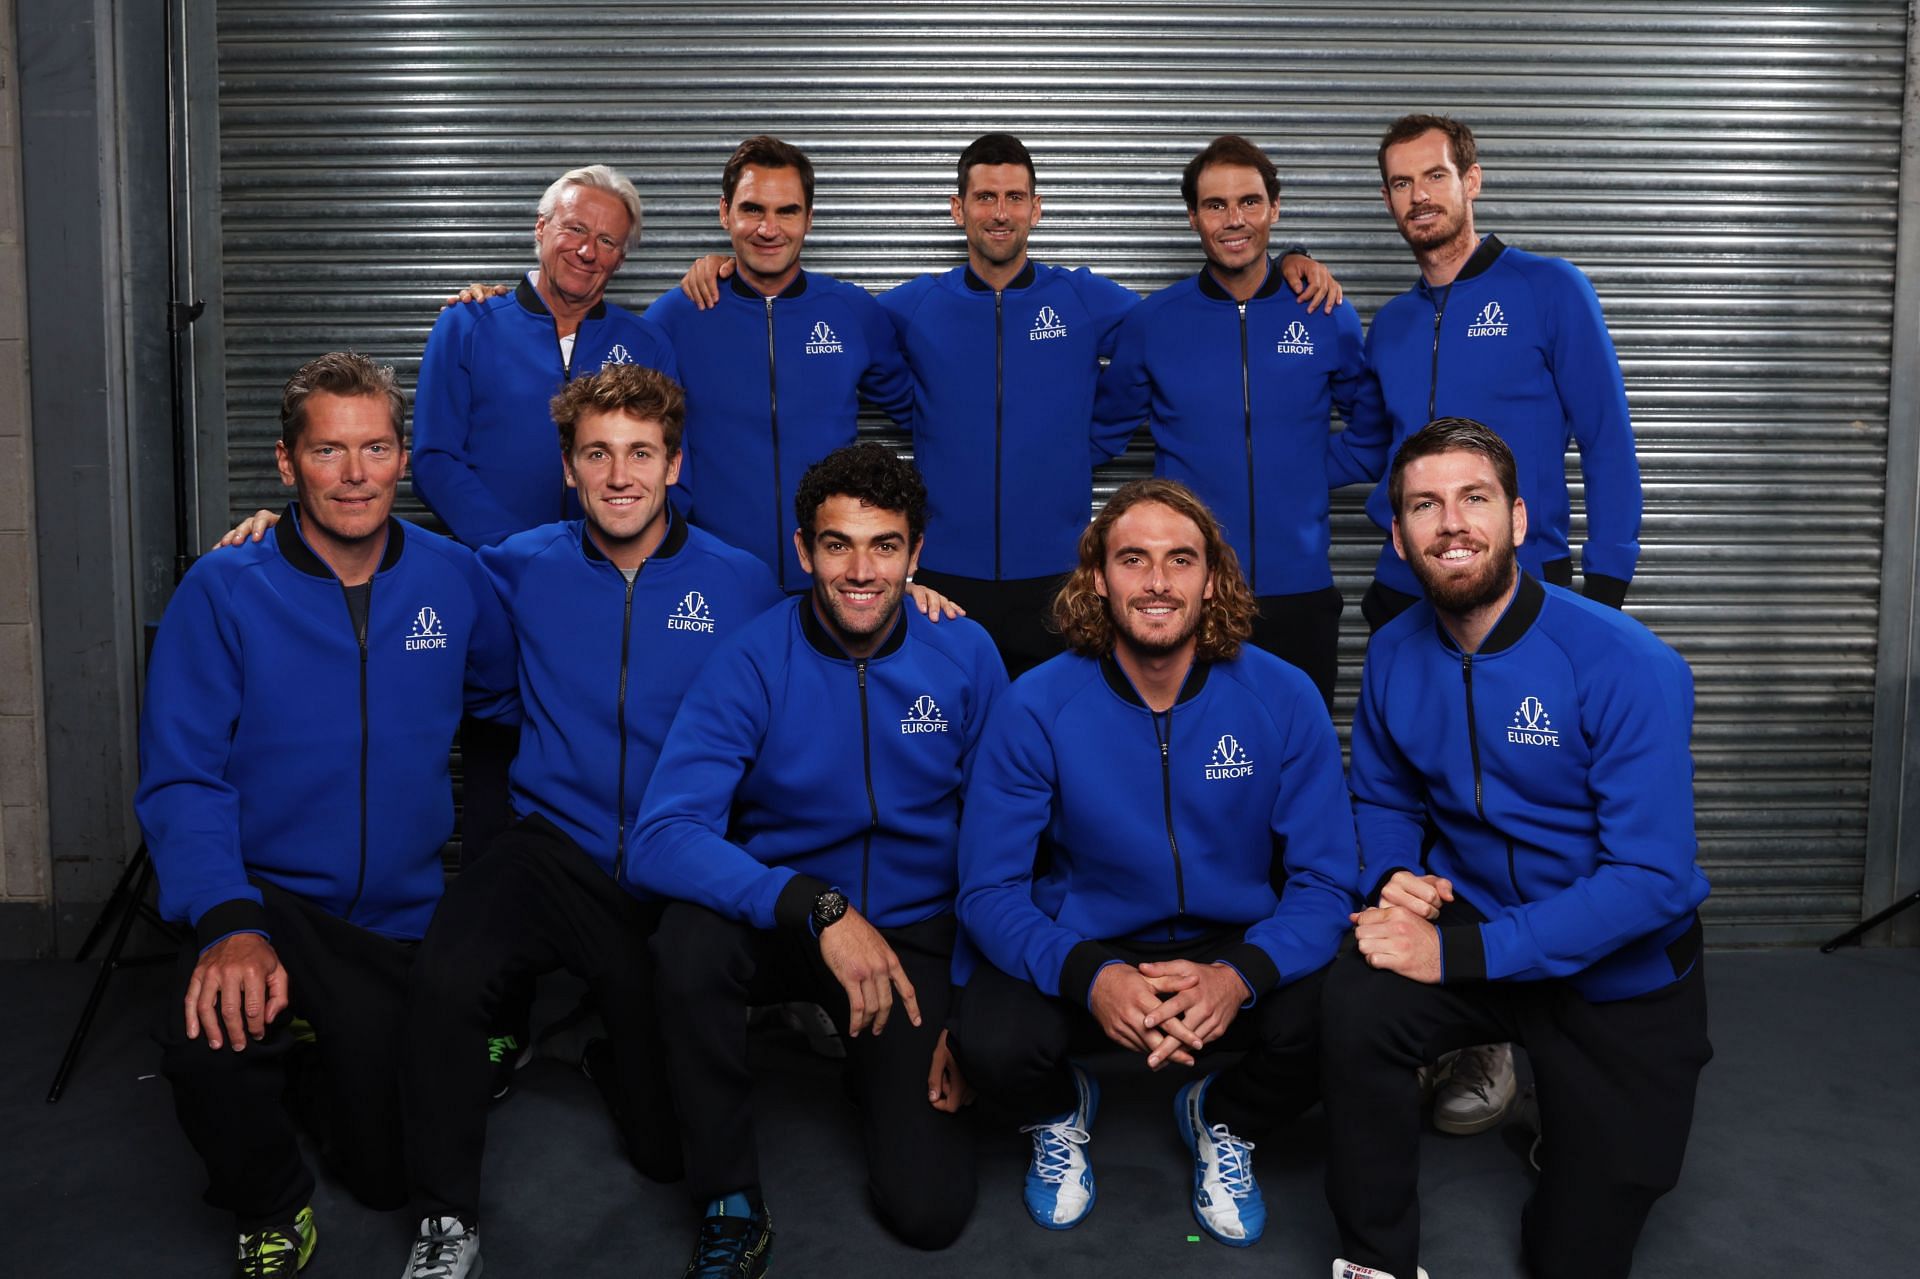 Casper Ruud with other members of Team Europe at Laver Cup 2022